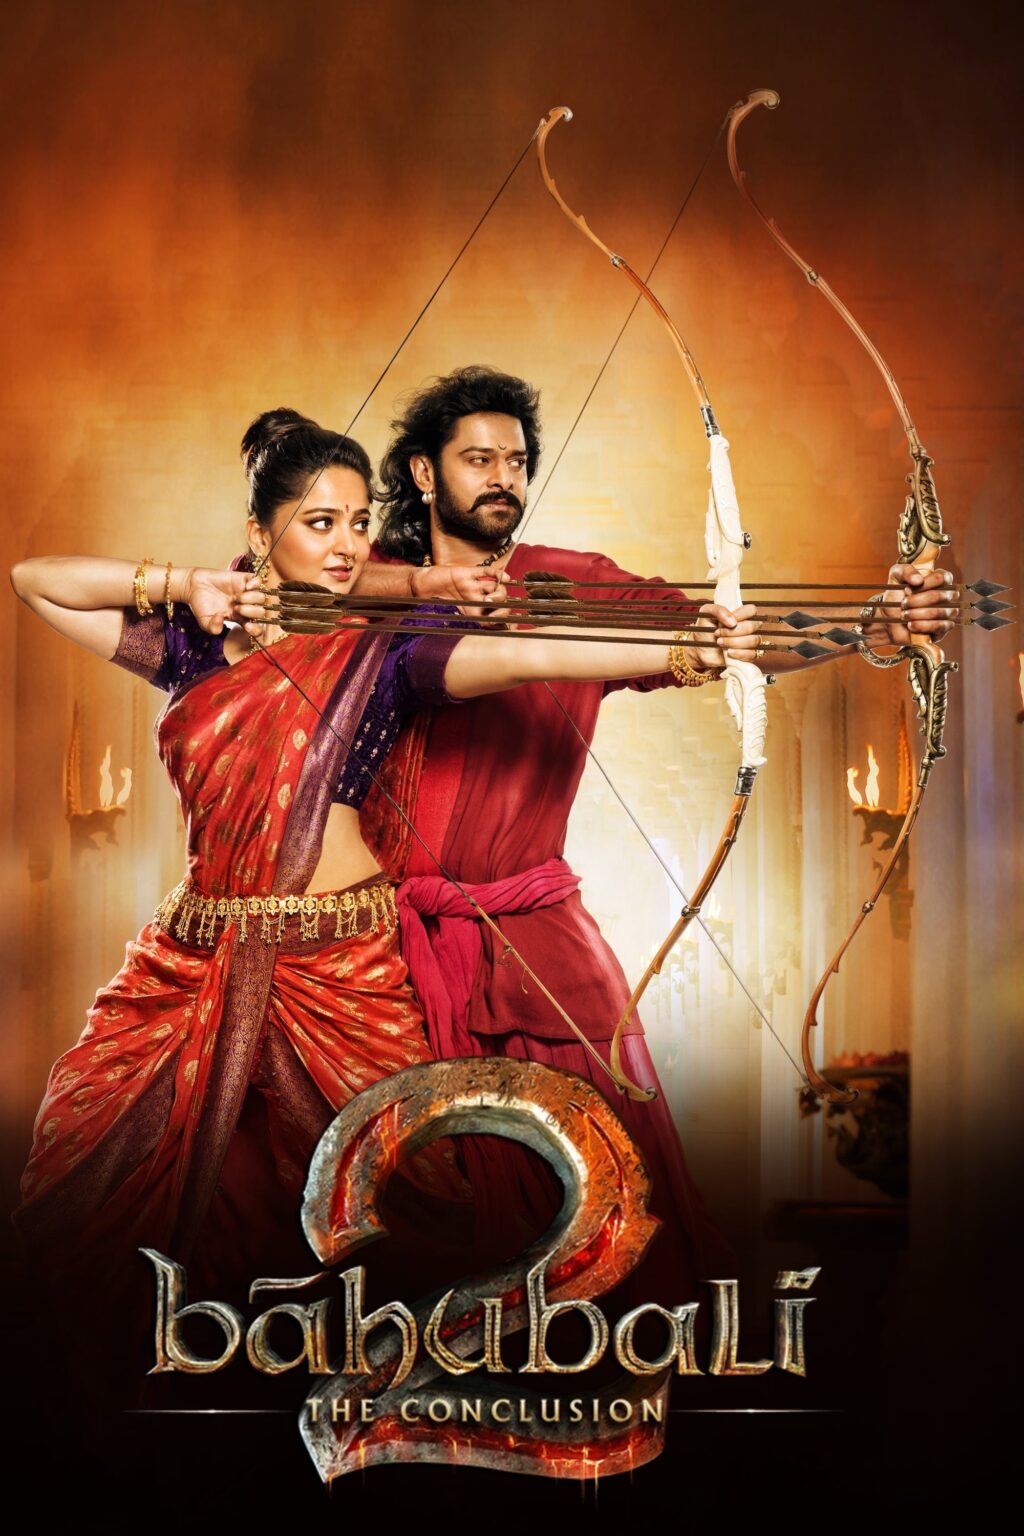 Poster for the movie "Bāhubali 2: The Conclusion"